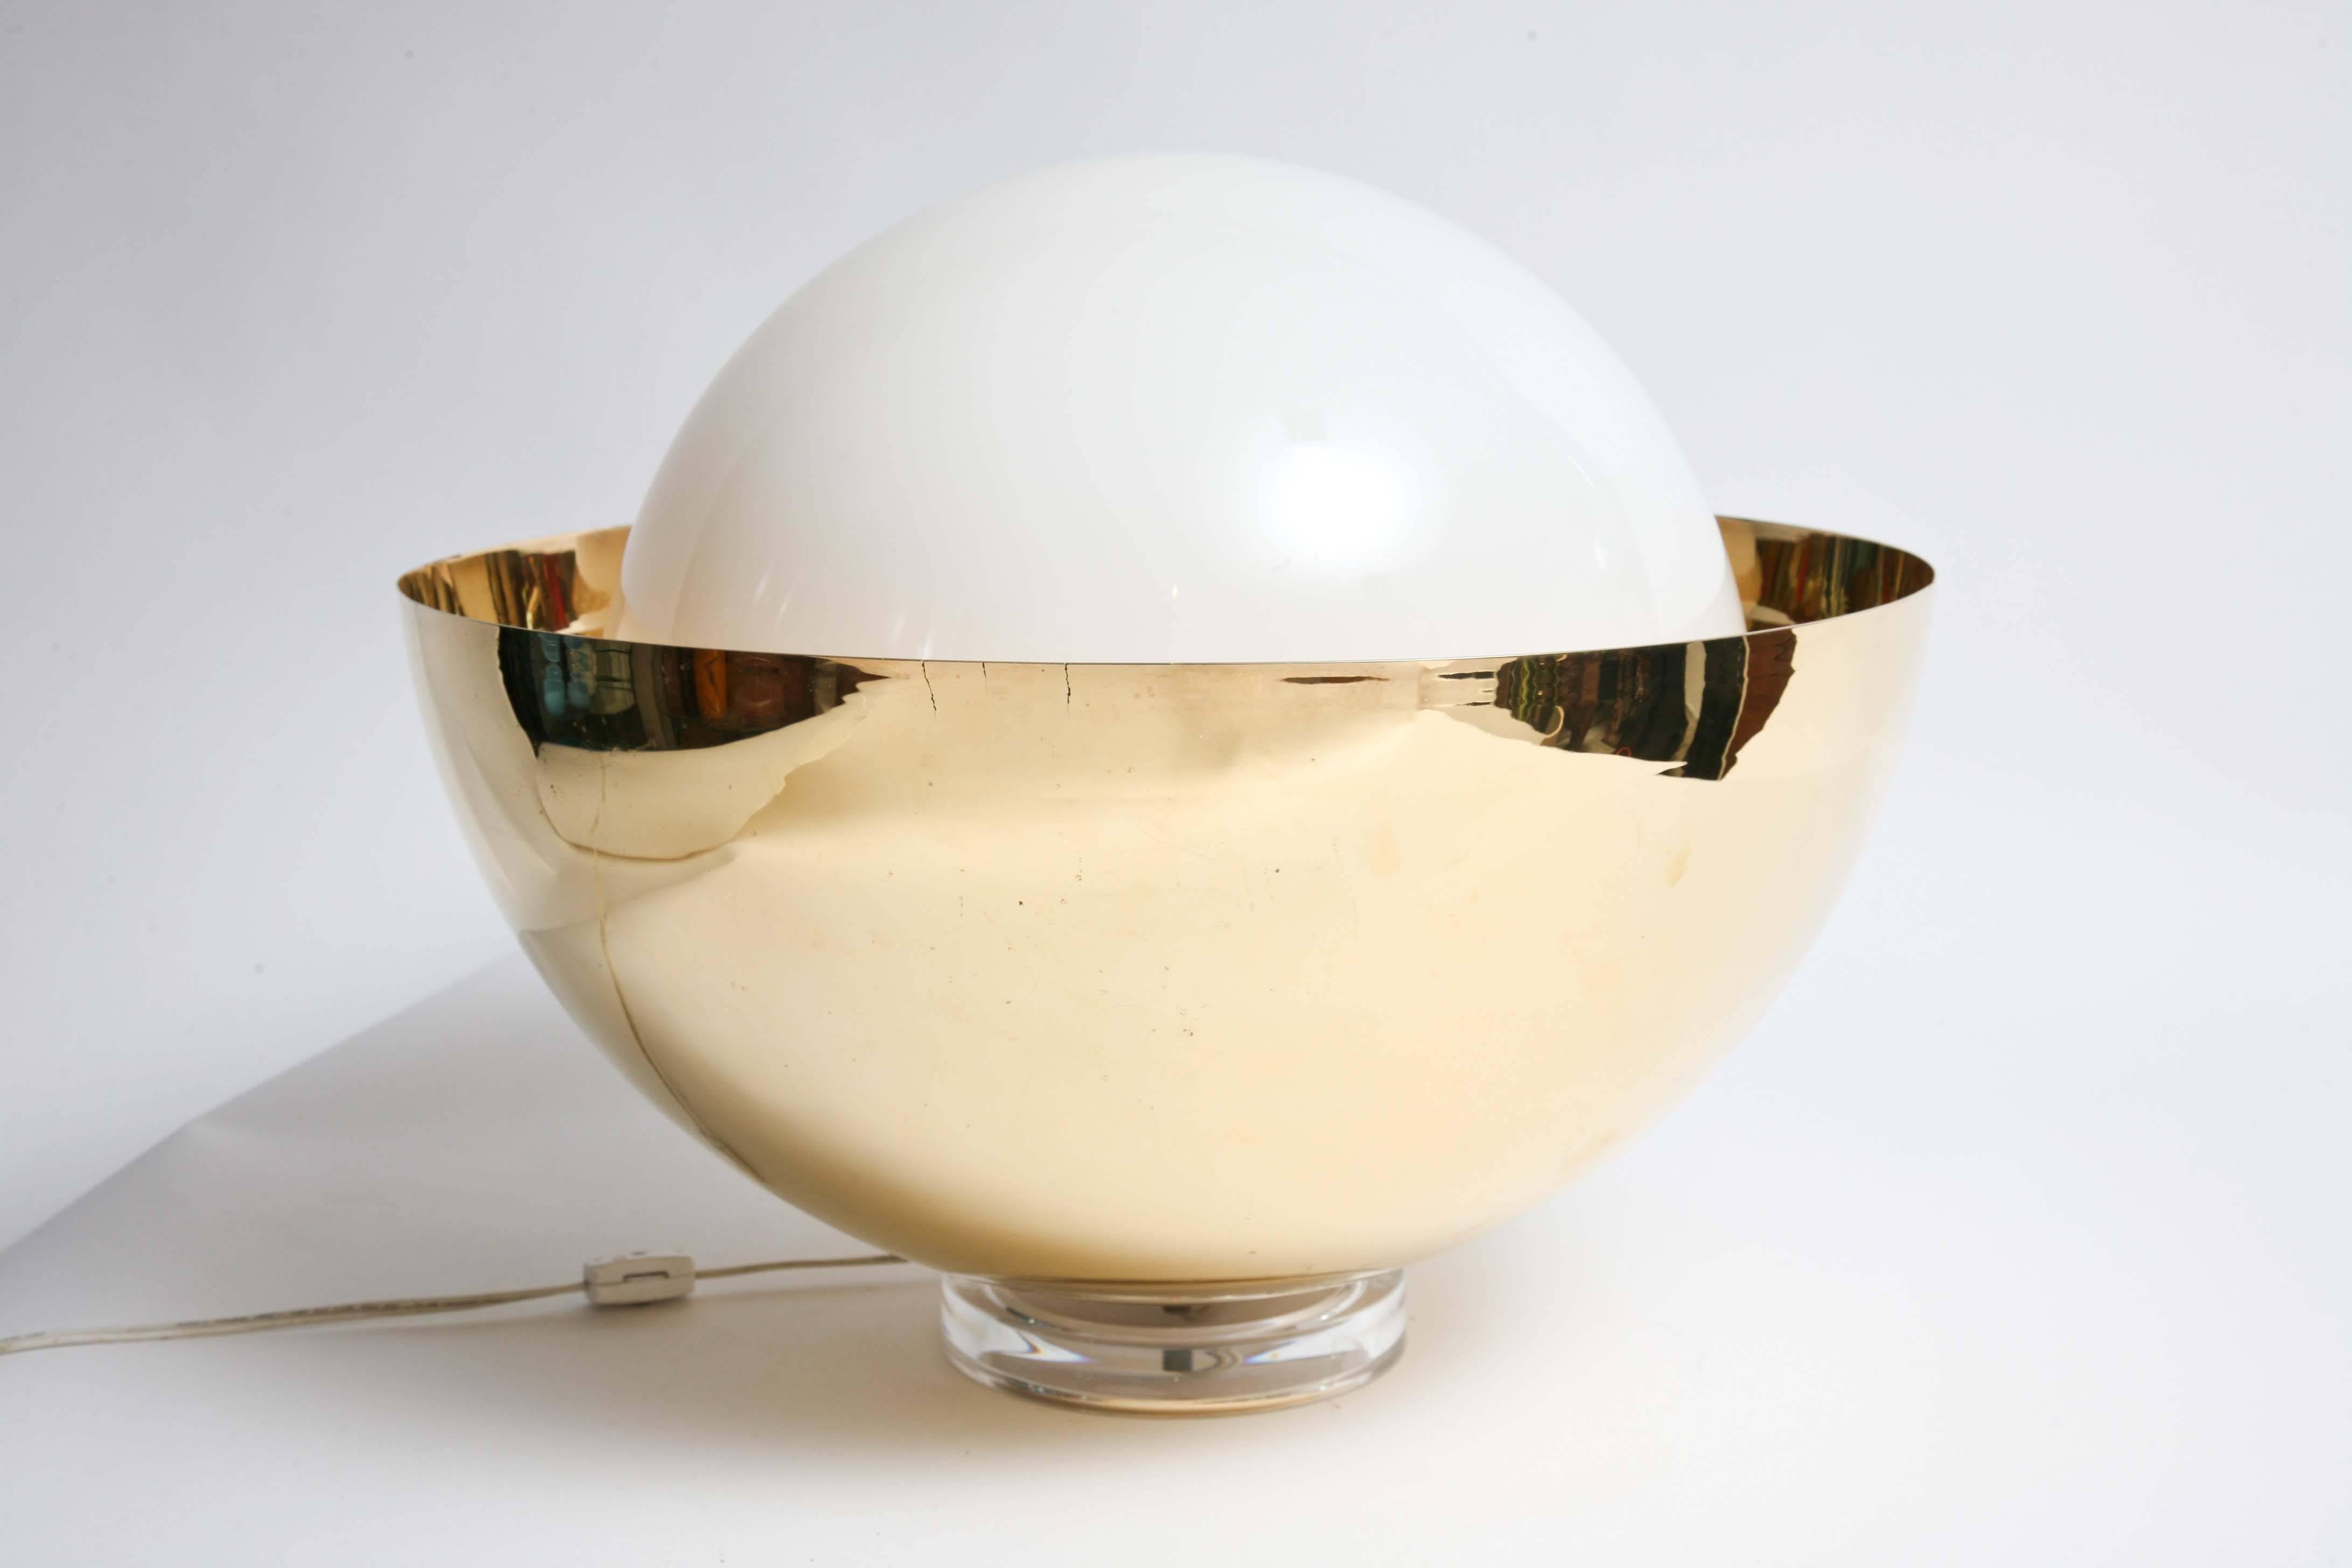 Polished solid brass base with large white glass globe. Acrylic base. Super cool lamp with nice glow. Base is 6